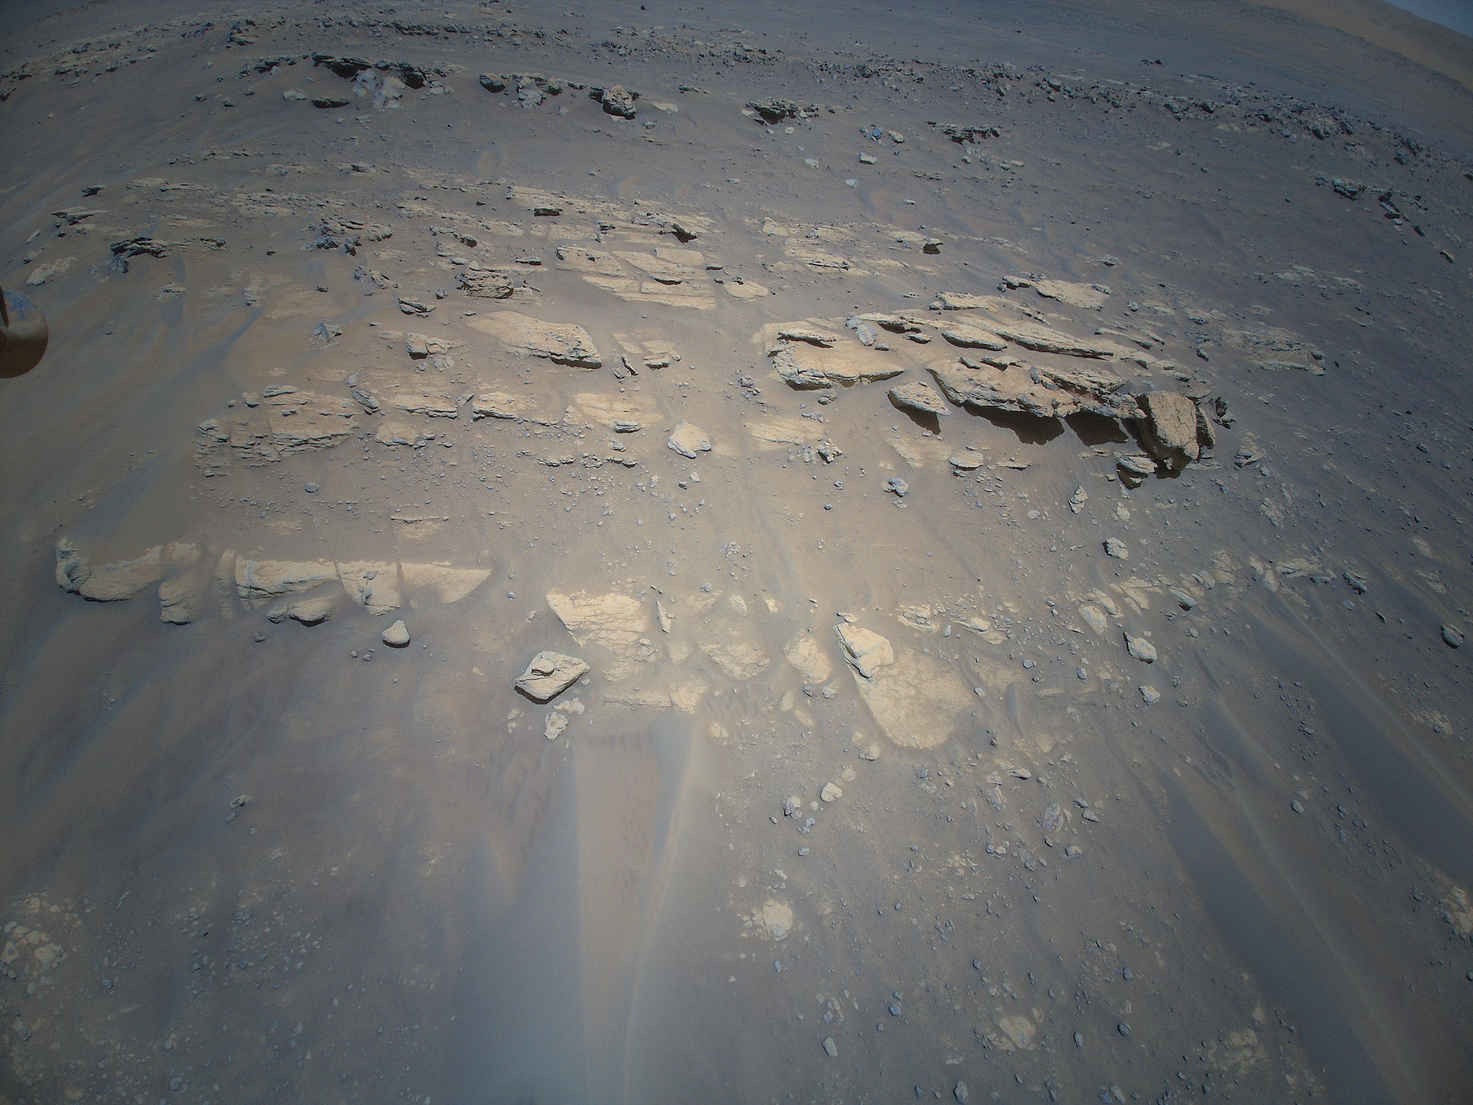 mars dirt rocks brown color photo from ingenuity helicopter flight